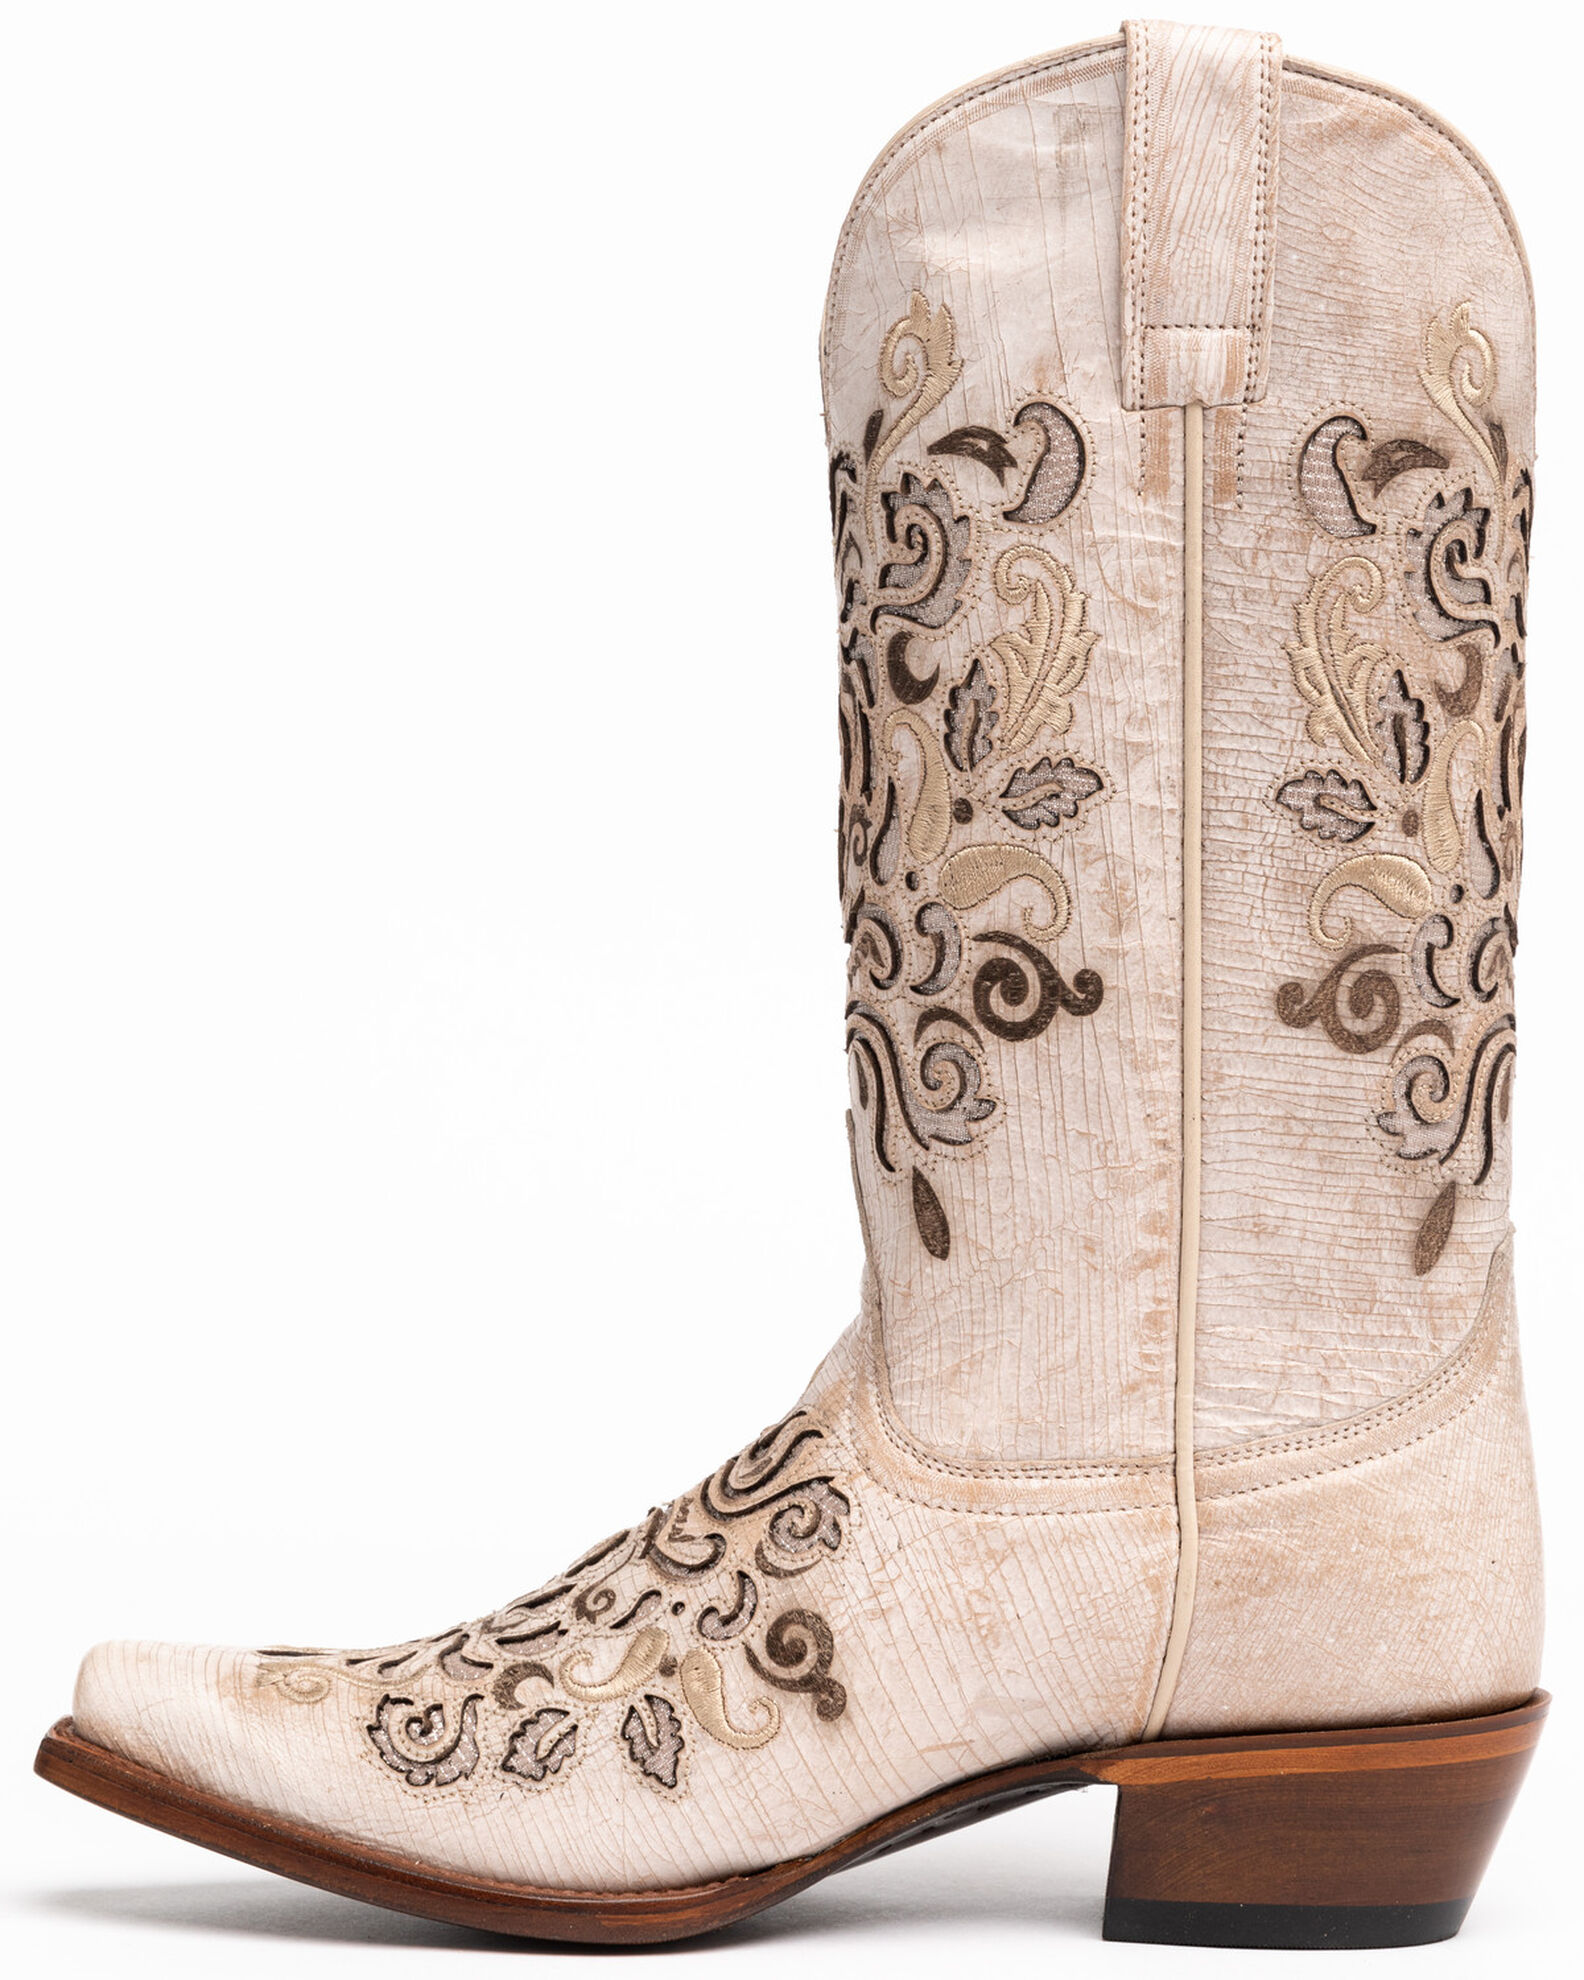 Product Name: Shyanne Women's Natalie Western Boots - Snip Toe